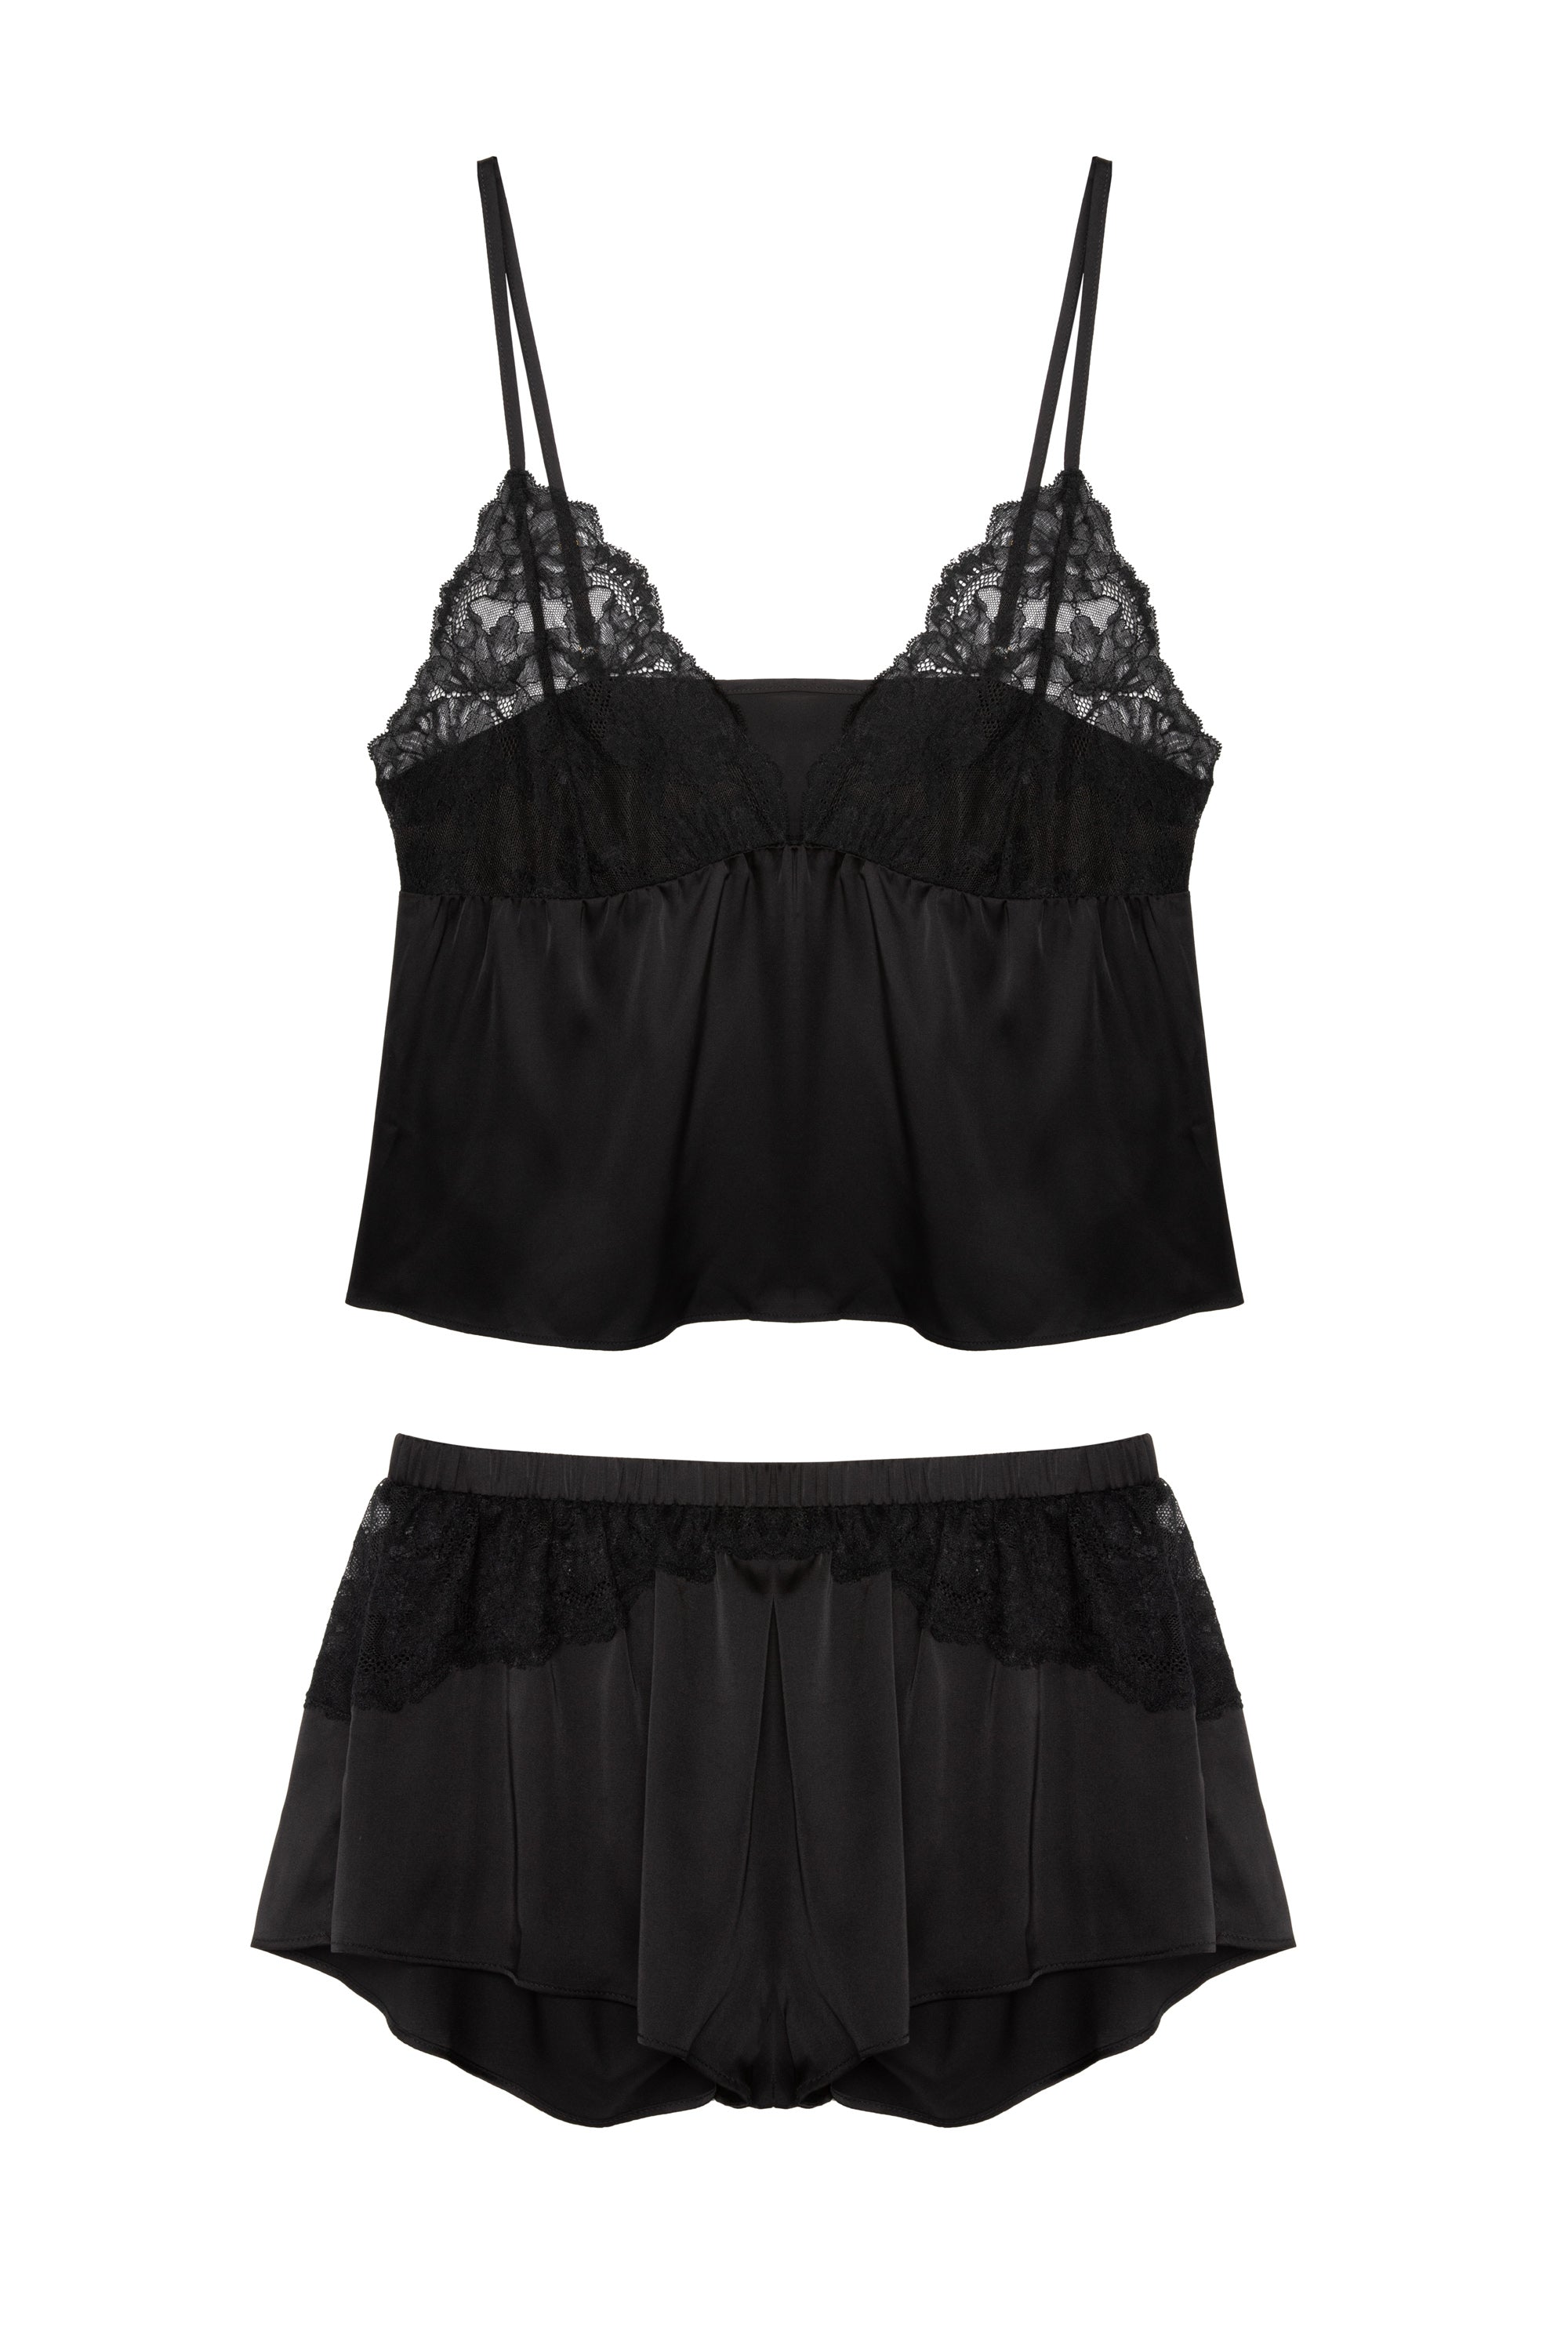 Rosie Black Satin and Lace Cami & Short Set